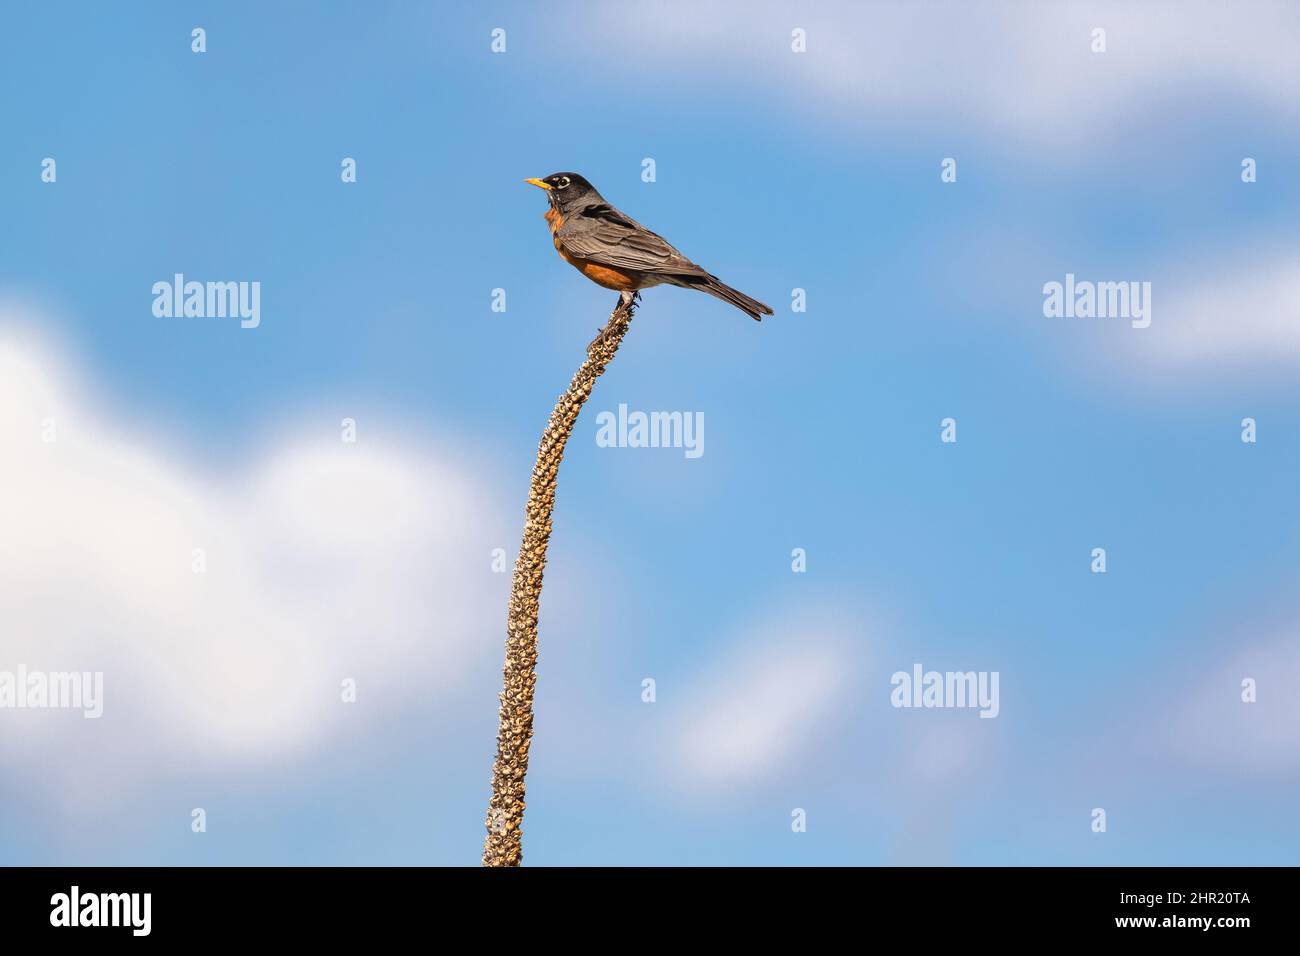 An American Robin sits high atop a Mullein plant stalk with a beautiful blue sky surrounded by fluffy white clouds. Stock Photo